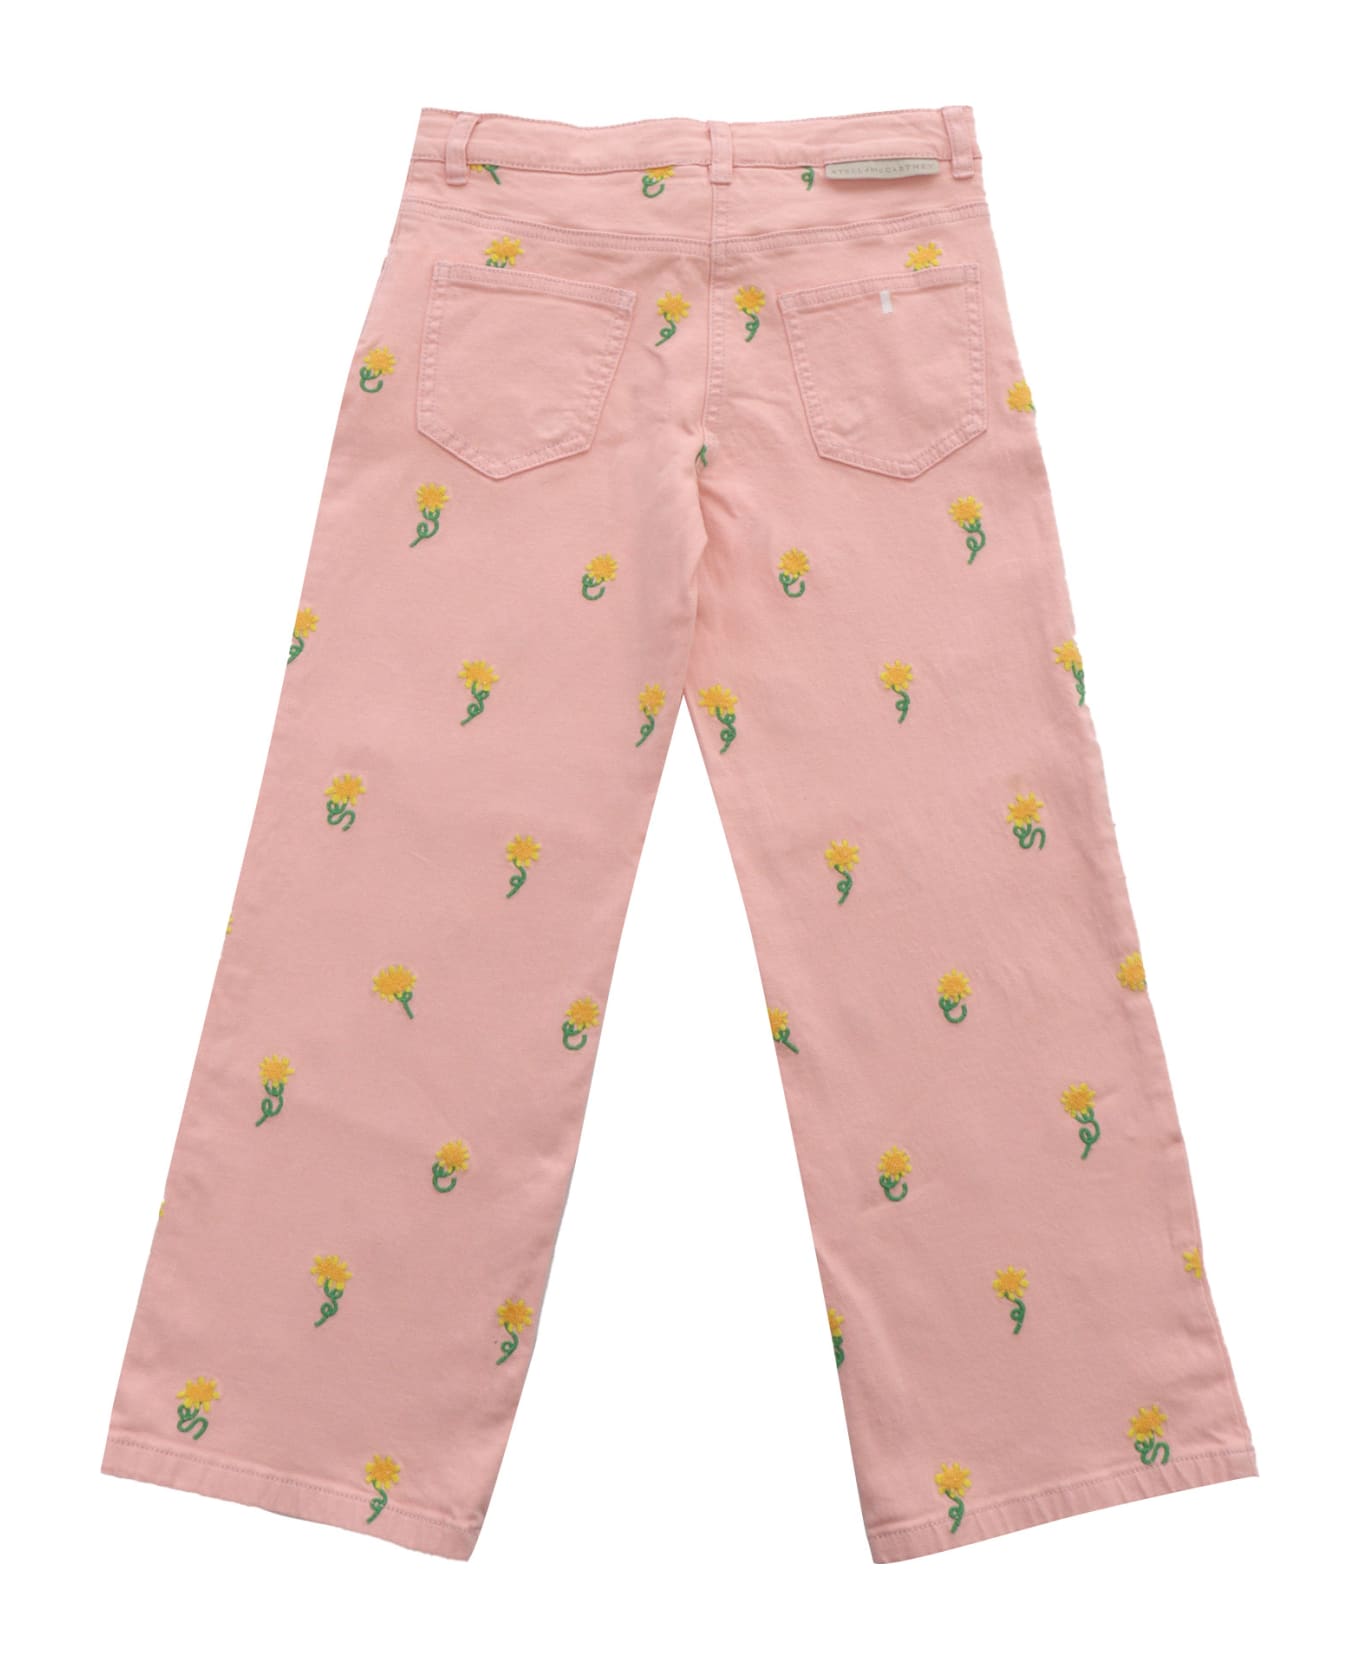 Stella McCartney Kids Pink Jeans With Flowers - PINK